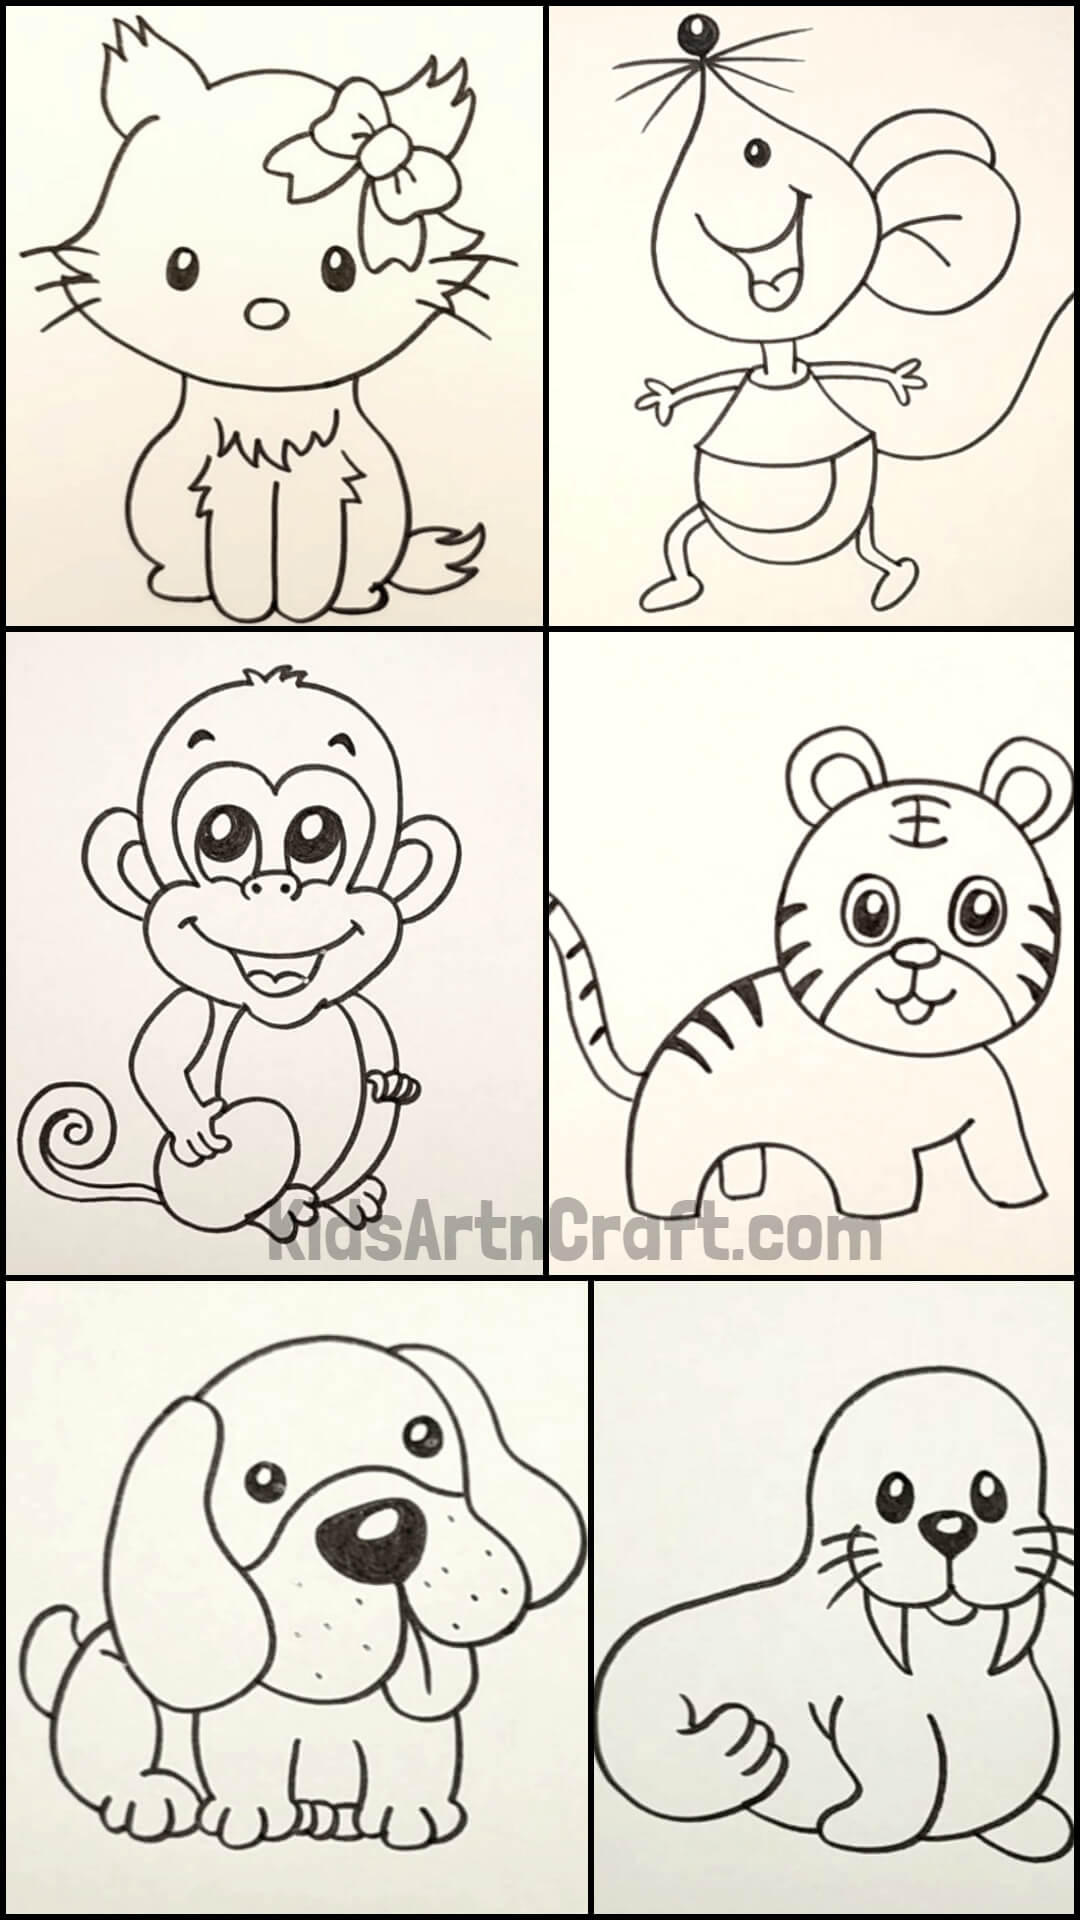 How to draw a cute panda - Easy animals to draw for kids